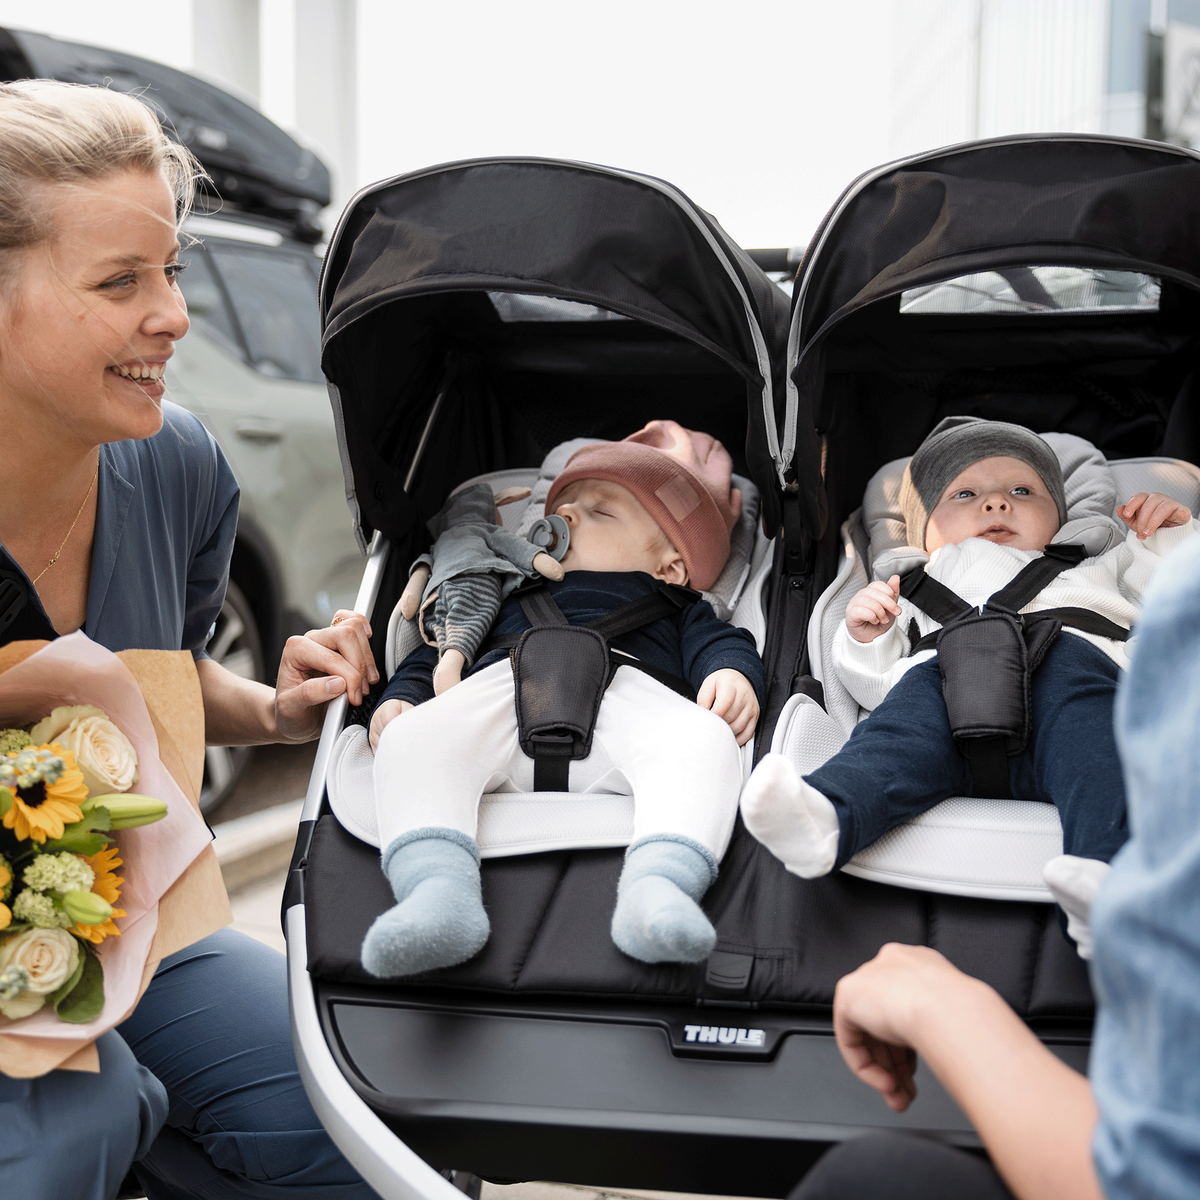 A woman holds a bouquet of flowers and tends to two kids in a black Thule Urban Glide 2 double jogging stroller.